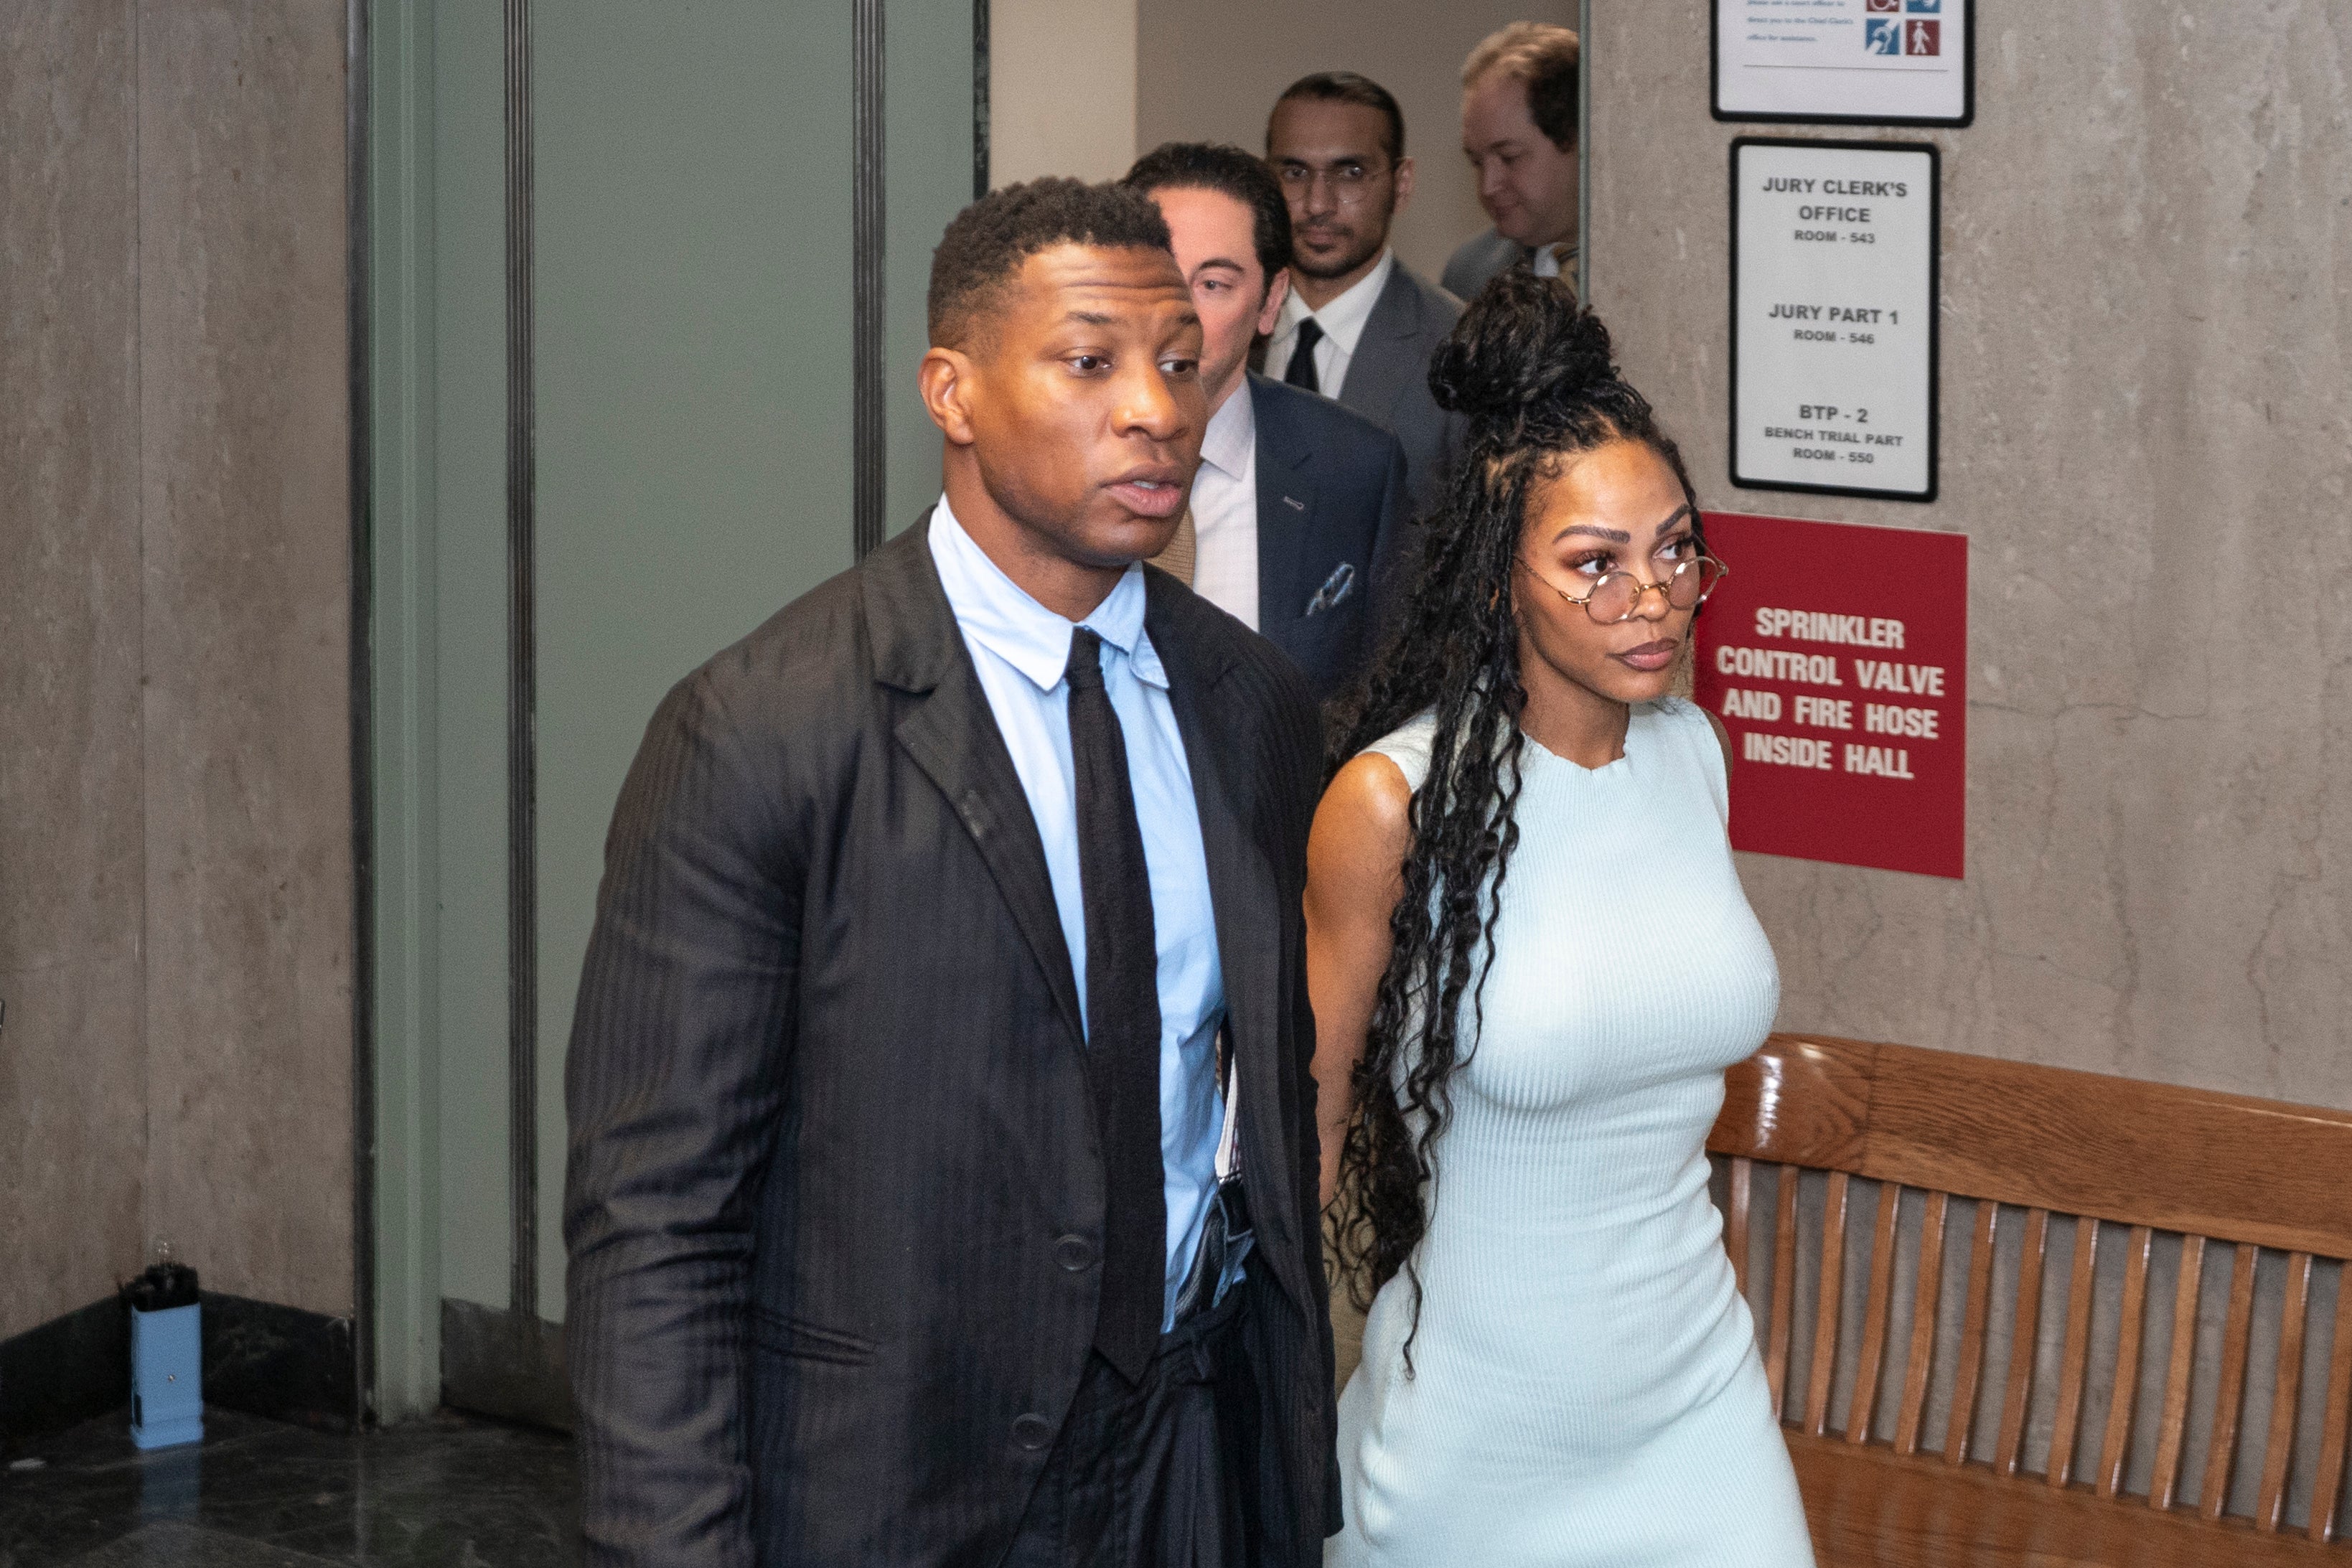 Jonathan Majors, accompanied by girlfriend Meagan Good, enters a courtroom at the Manhattan Criminal Courthouse